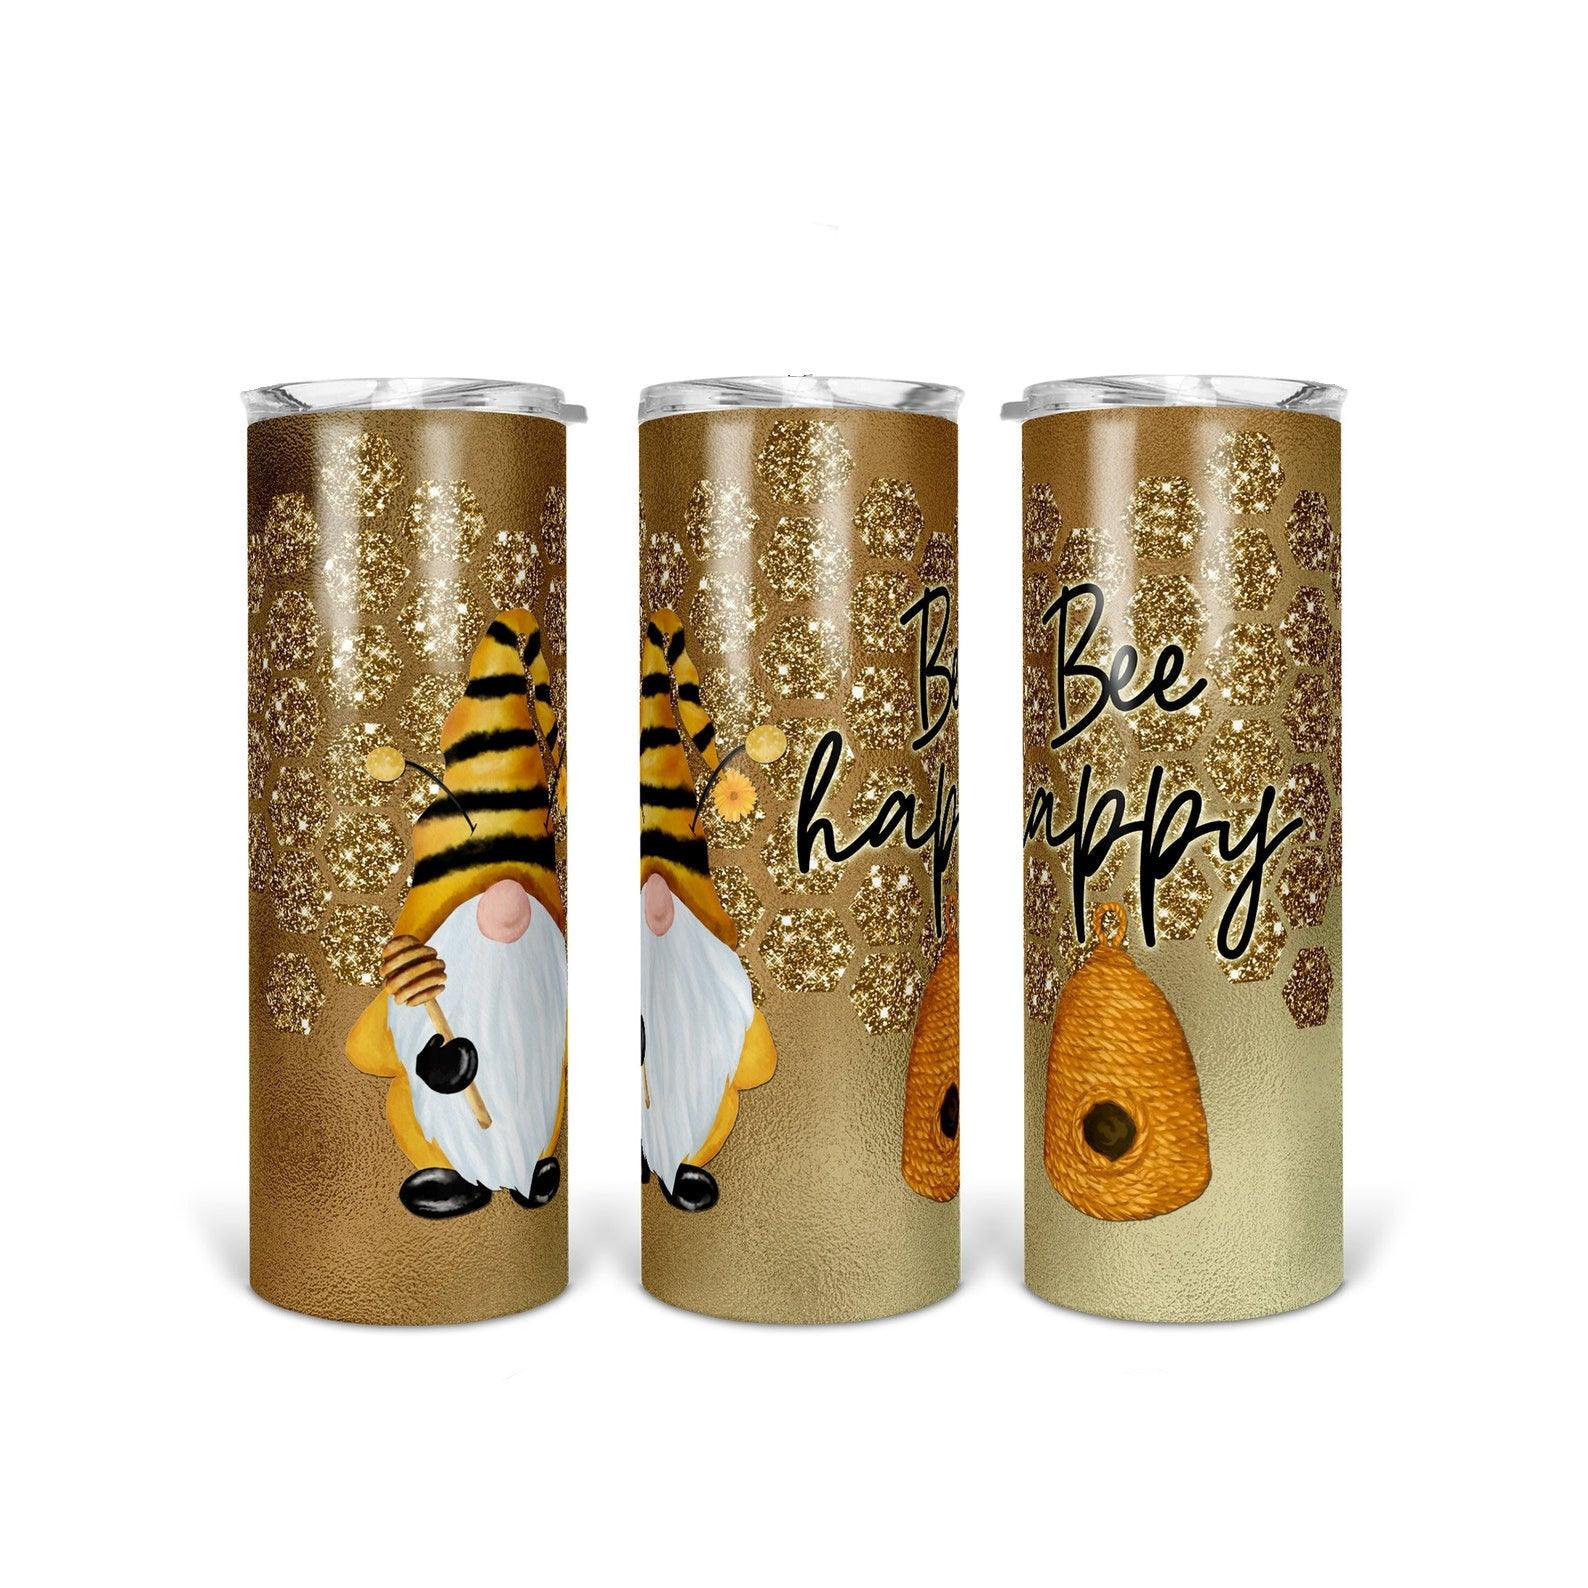 Bee Happy Gnome 30 oz. Straight Skinny Tumbler by SSC Designs - Scrapbook Supply Companies